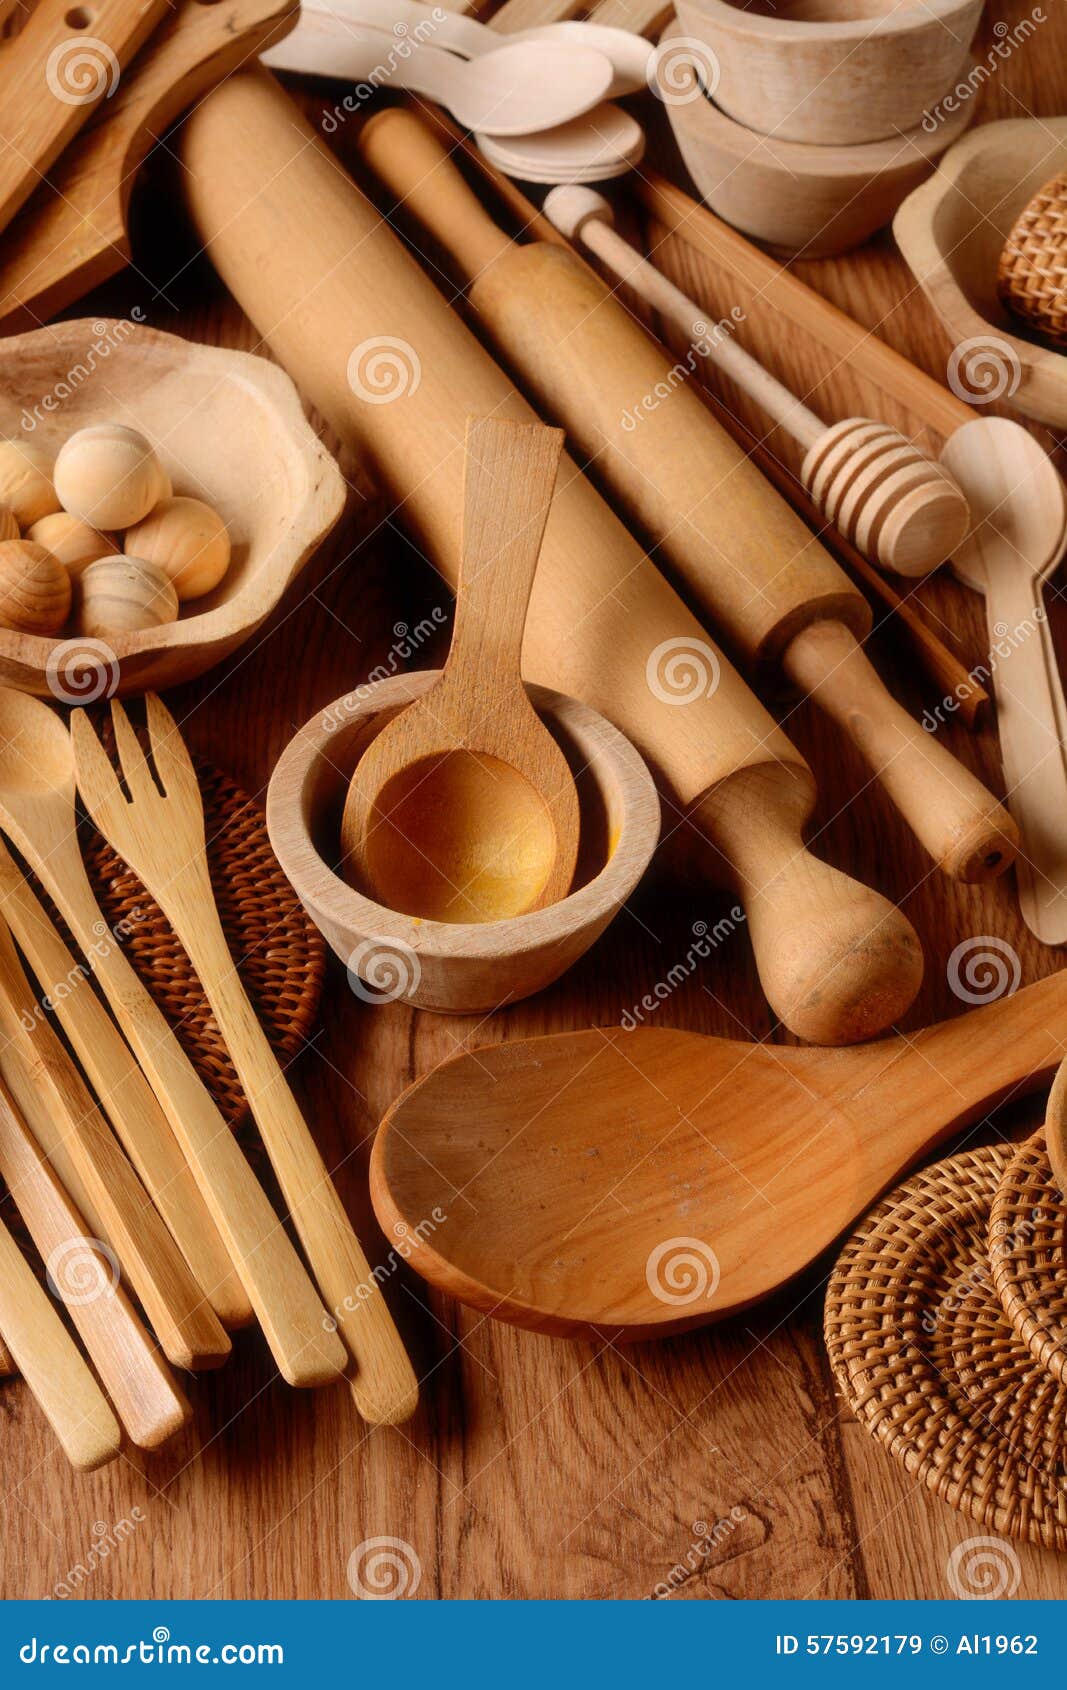 Kitchen utensils wooden stock image. Image of brown, collection ...